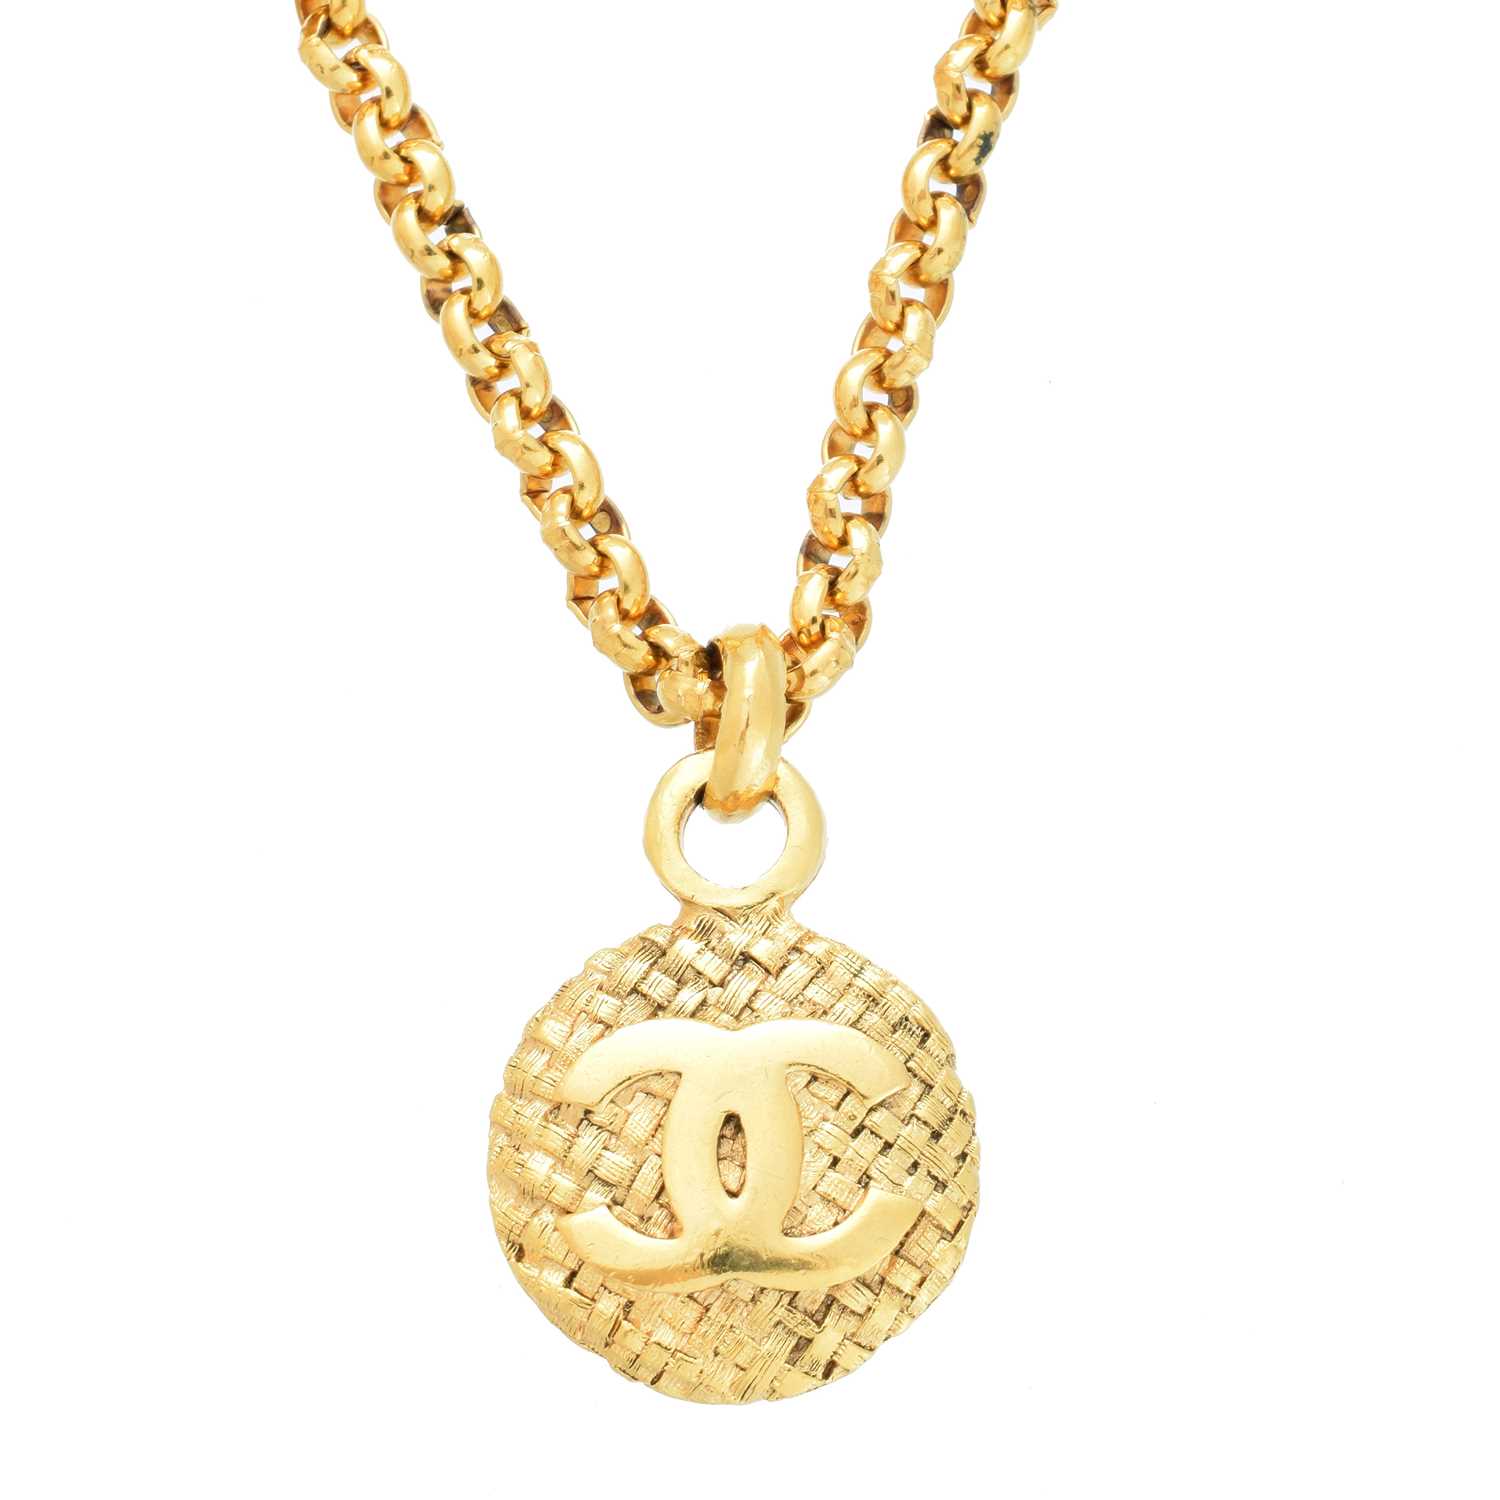 A Chanel pendant necklace, - Image 2 of 3